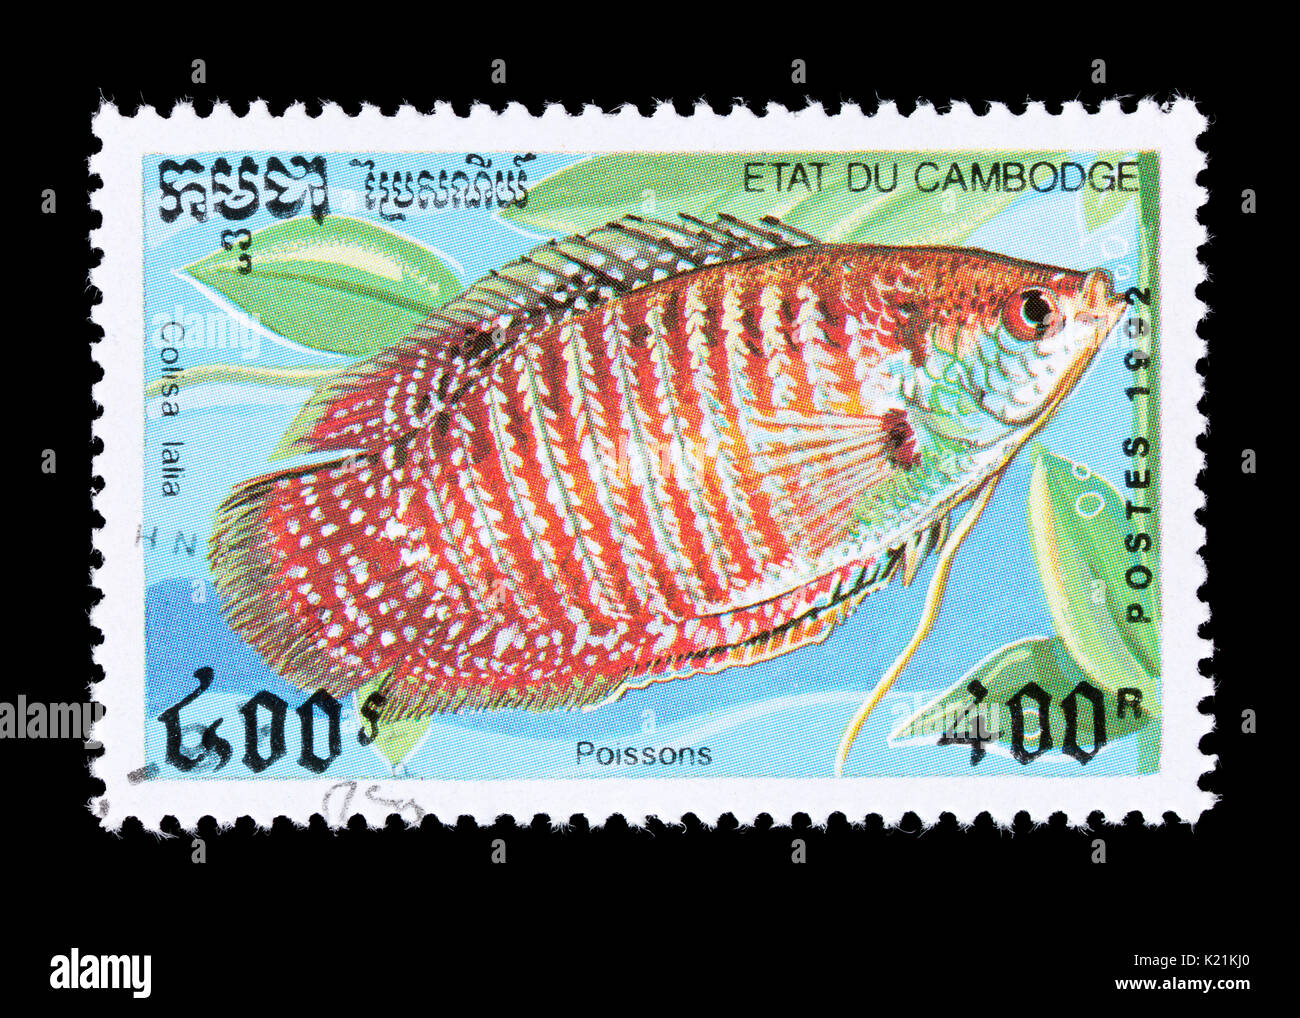 Postage stamp from Cambodia depicting a Dwarf Gourami (Colisa lalia) Stock Photo